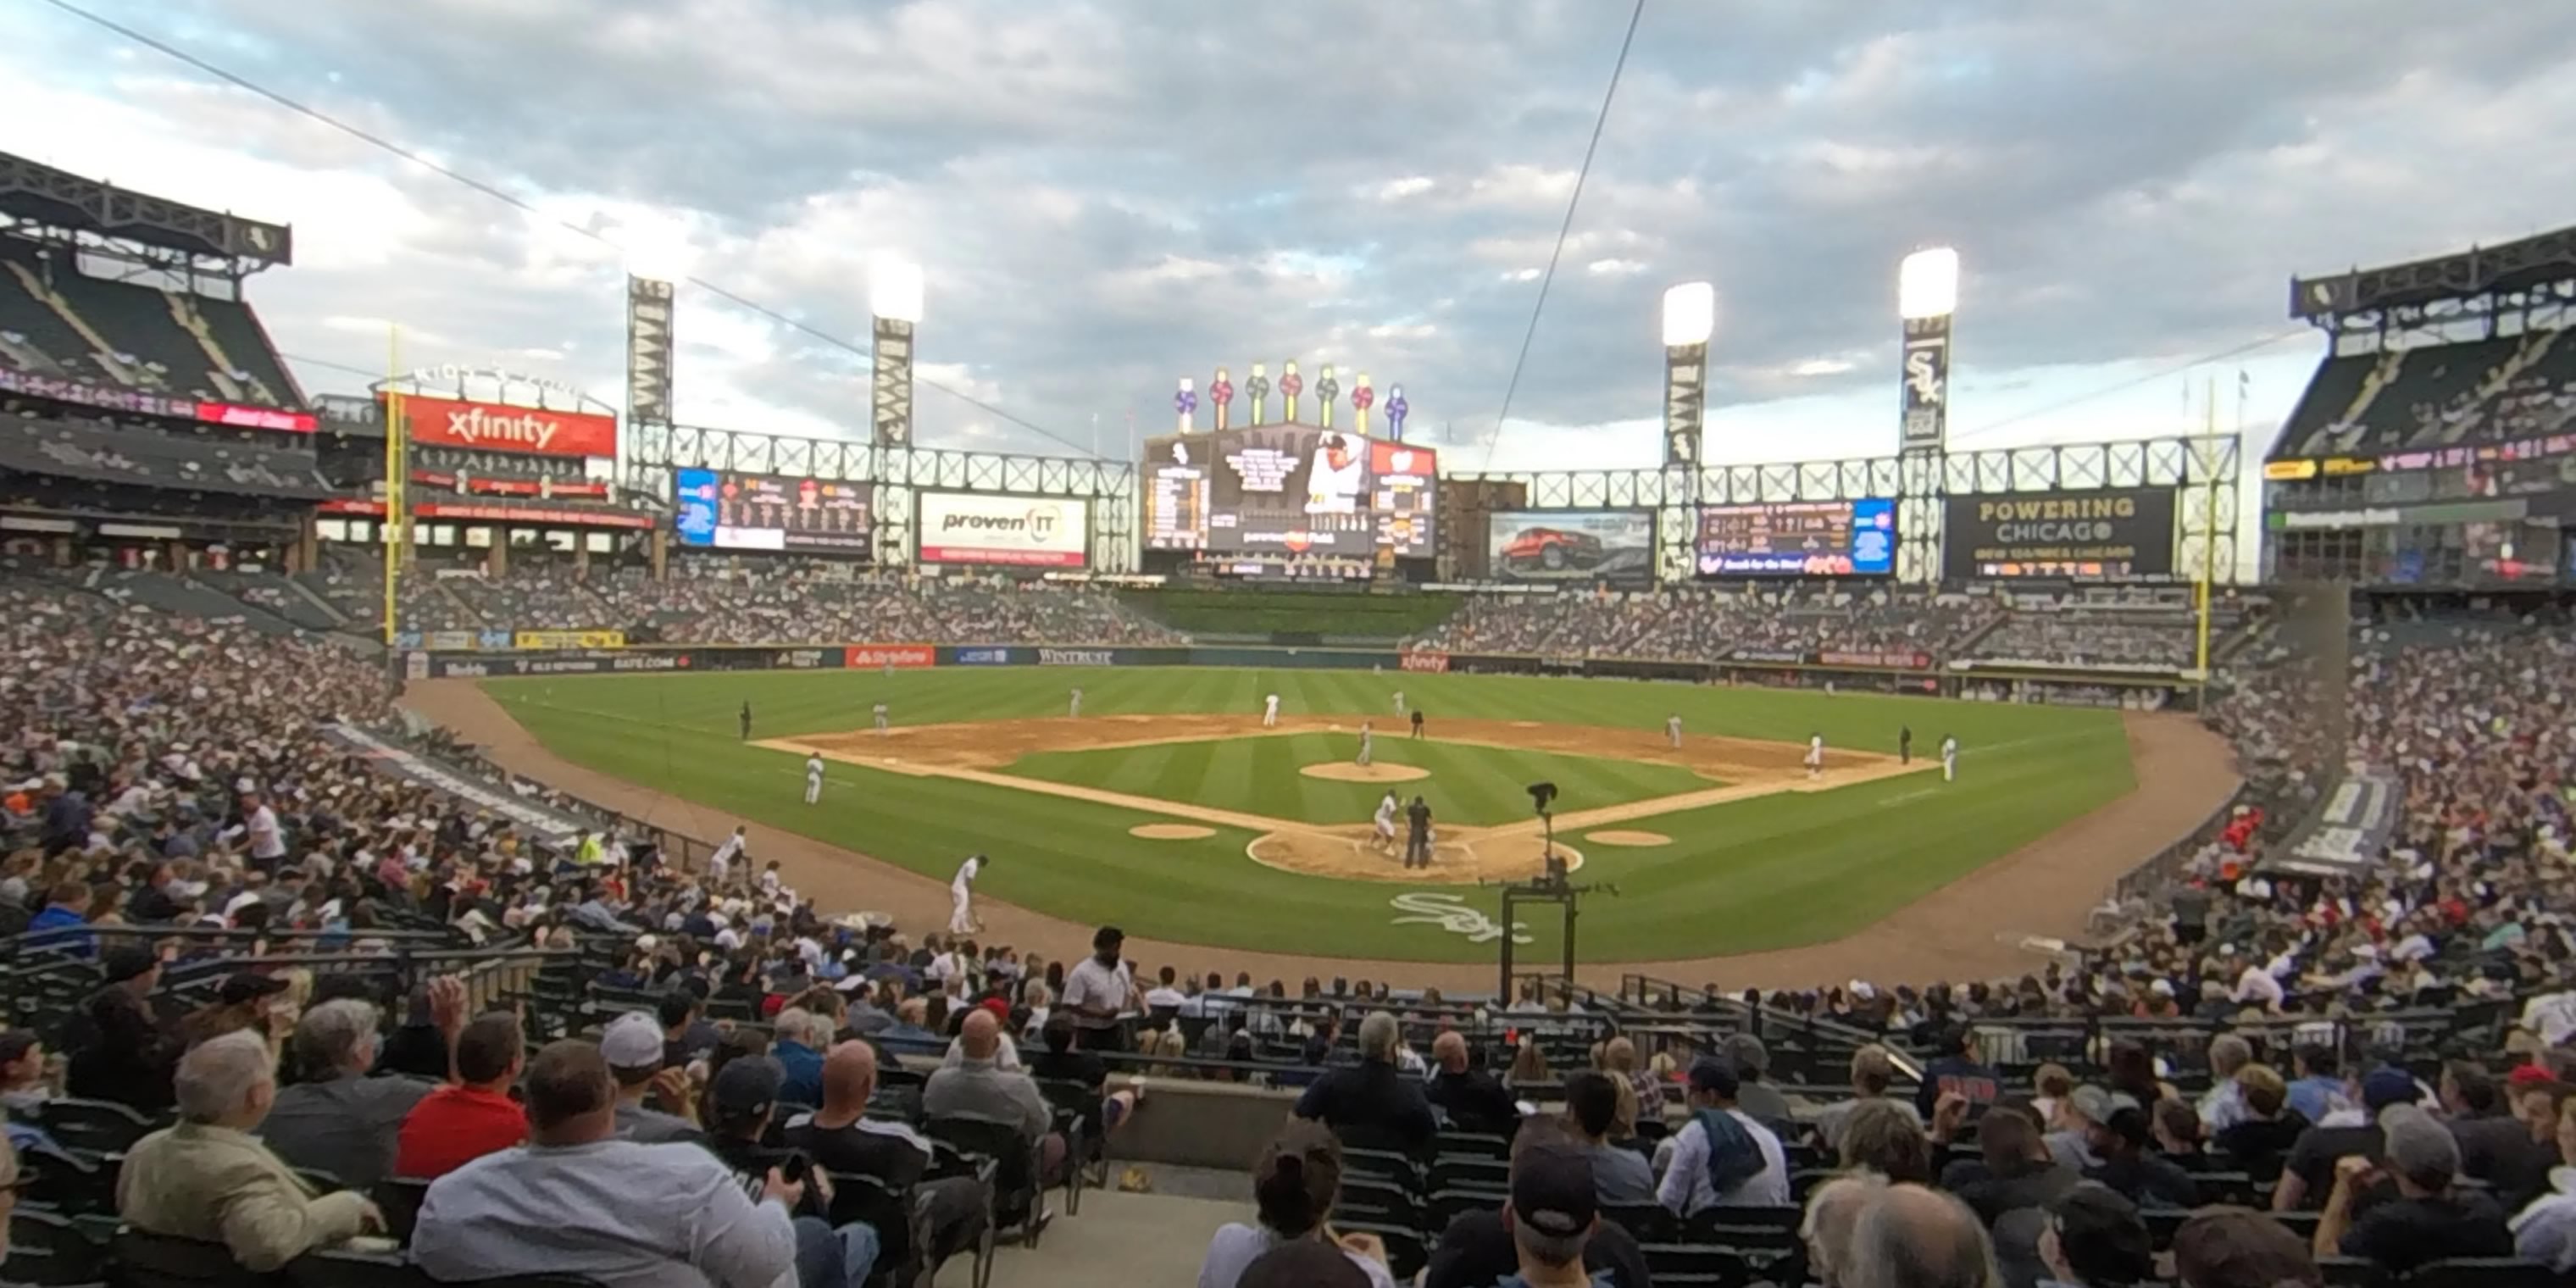 section 132 panoramic seat view  - guaranteed rate field